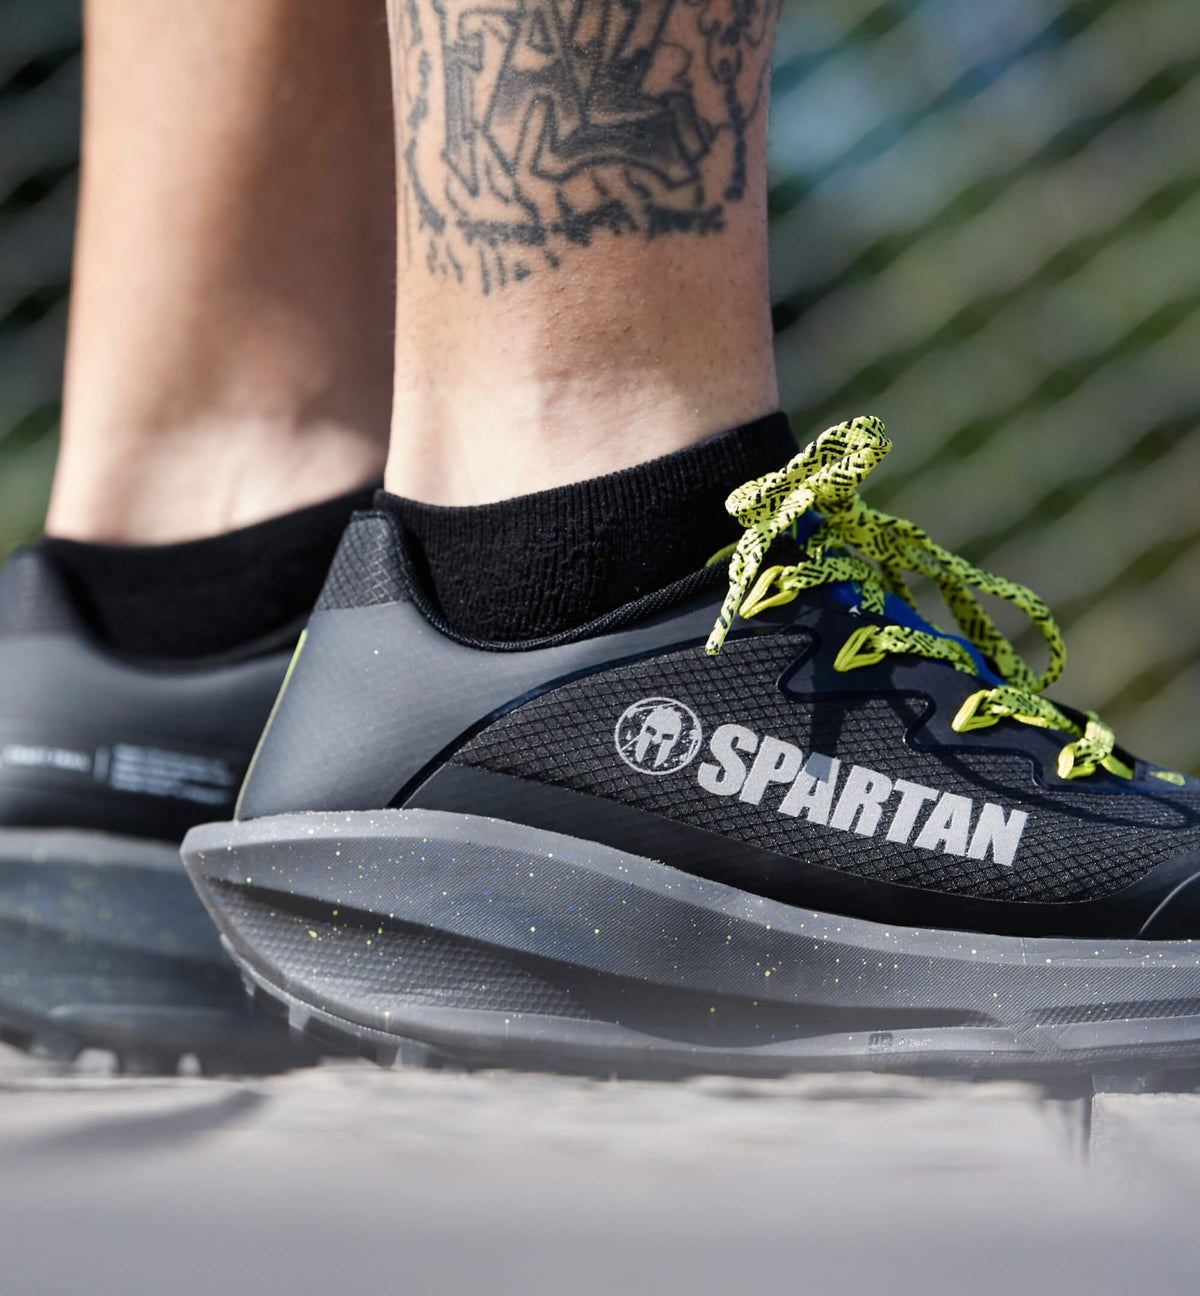 SPARTAN by CRAFT Ultra Carbon Trail Shoe - Men's